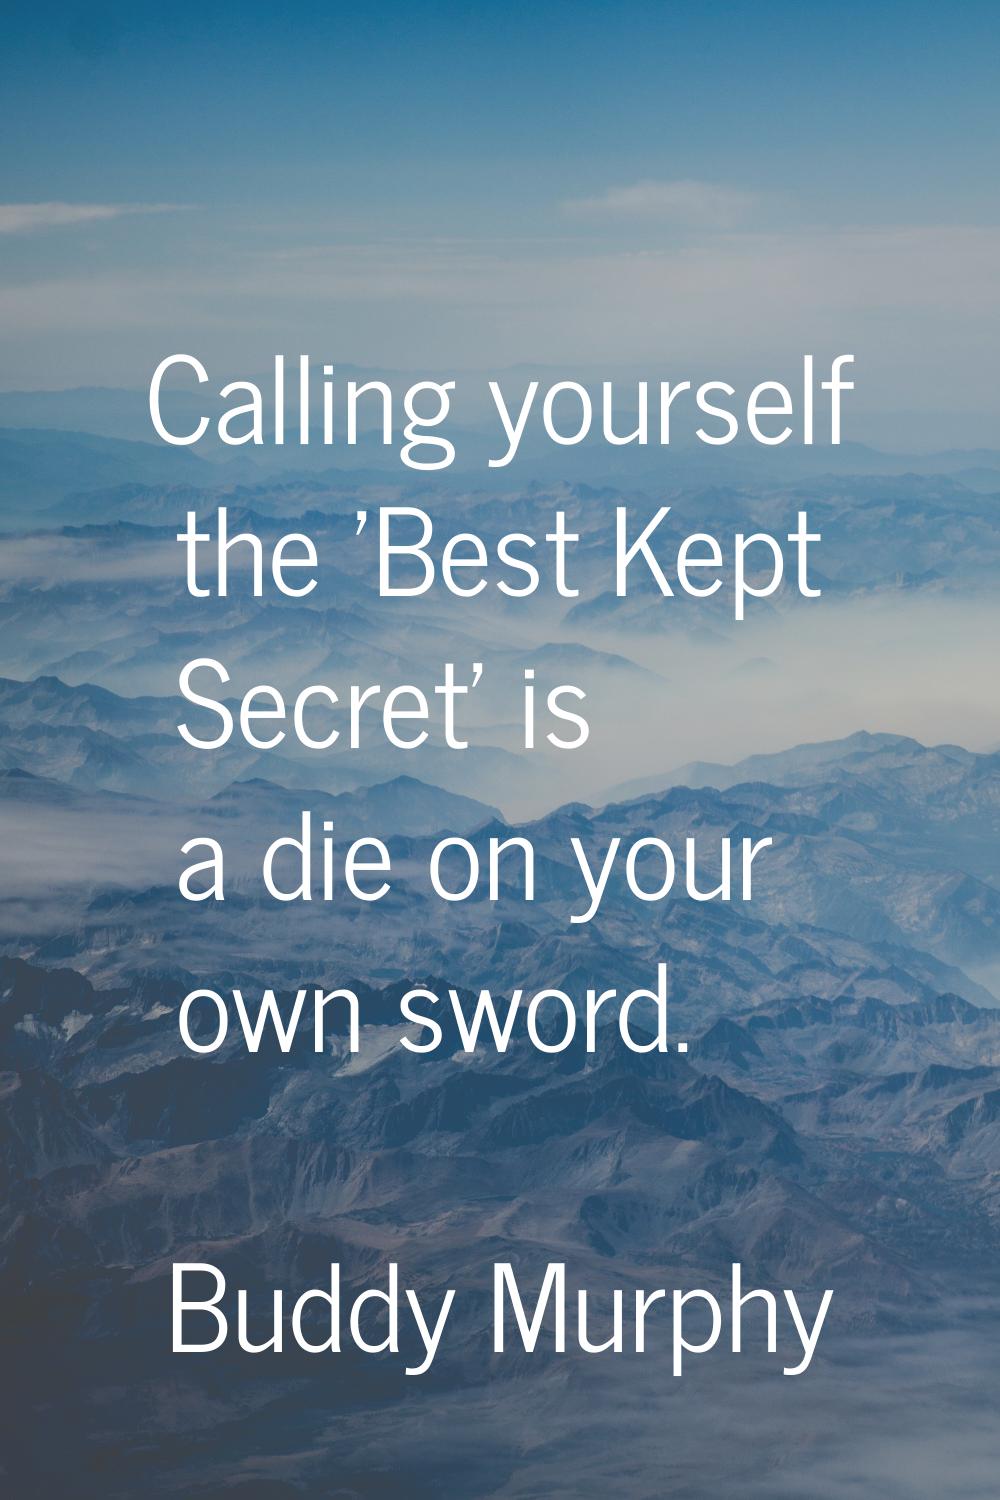 Calling yourself the 'Best Kept Secret' is a die on your own sword.